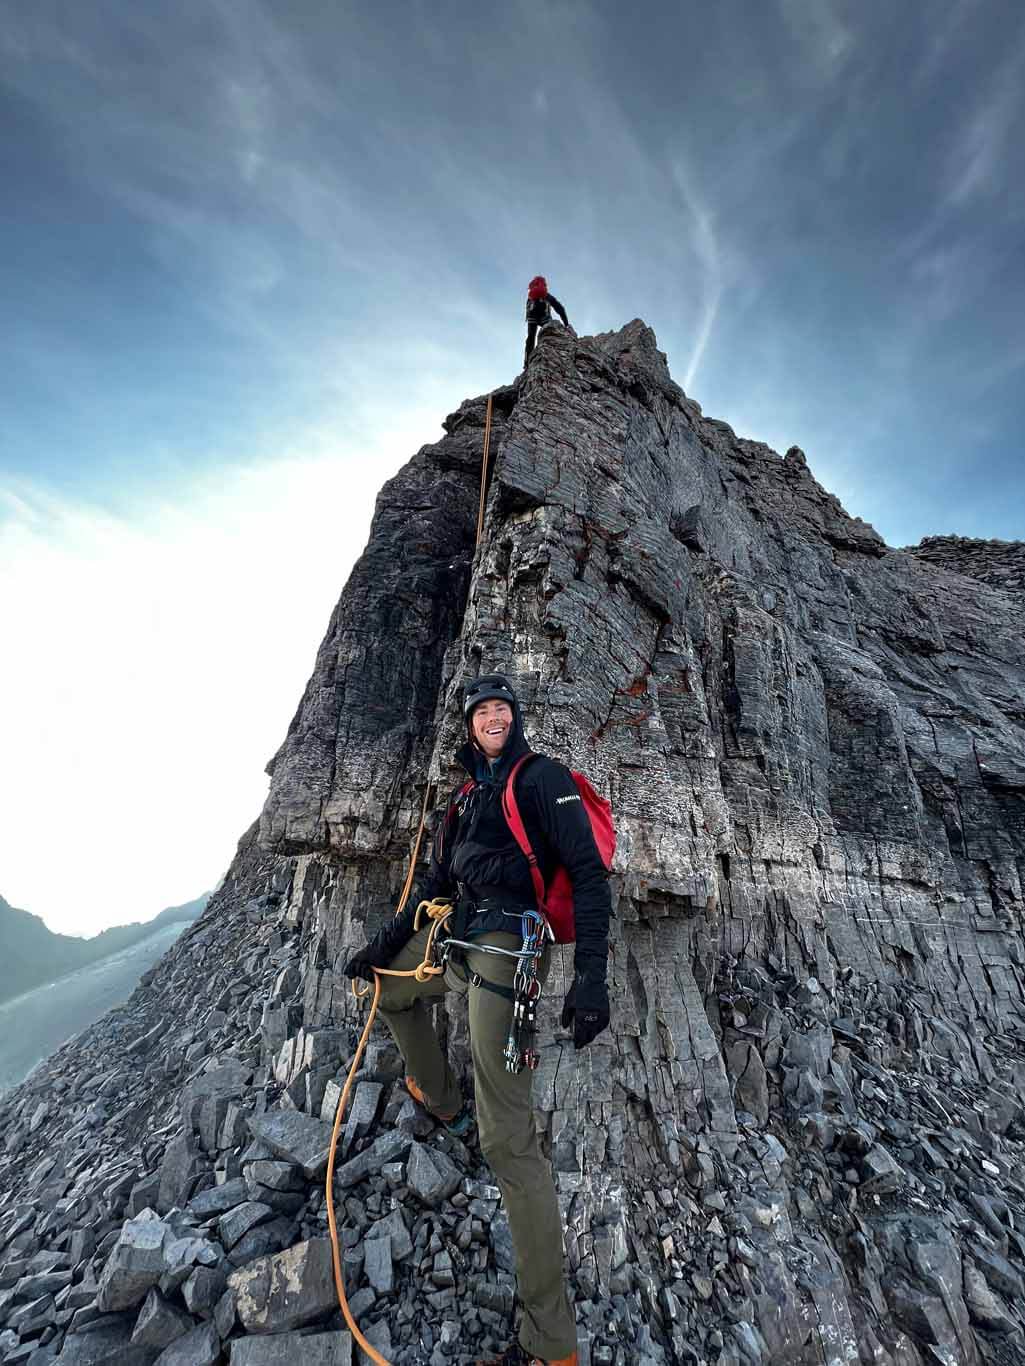 Tim Taylor guiding a client alpine climbing who is summiting a ridge line in the Alberta Rocky Mountains